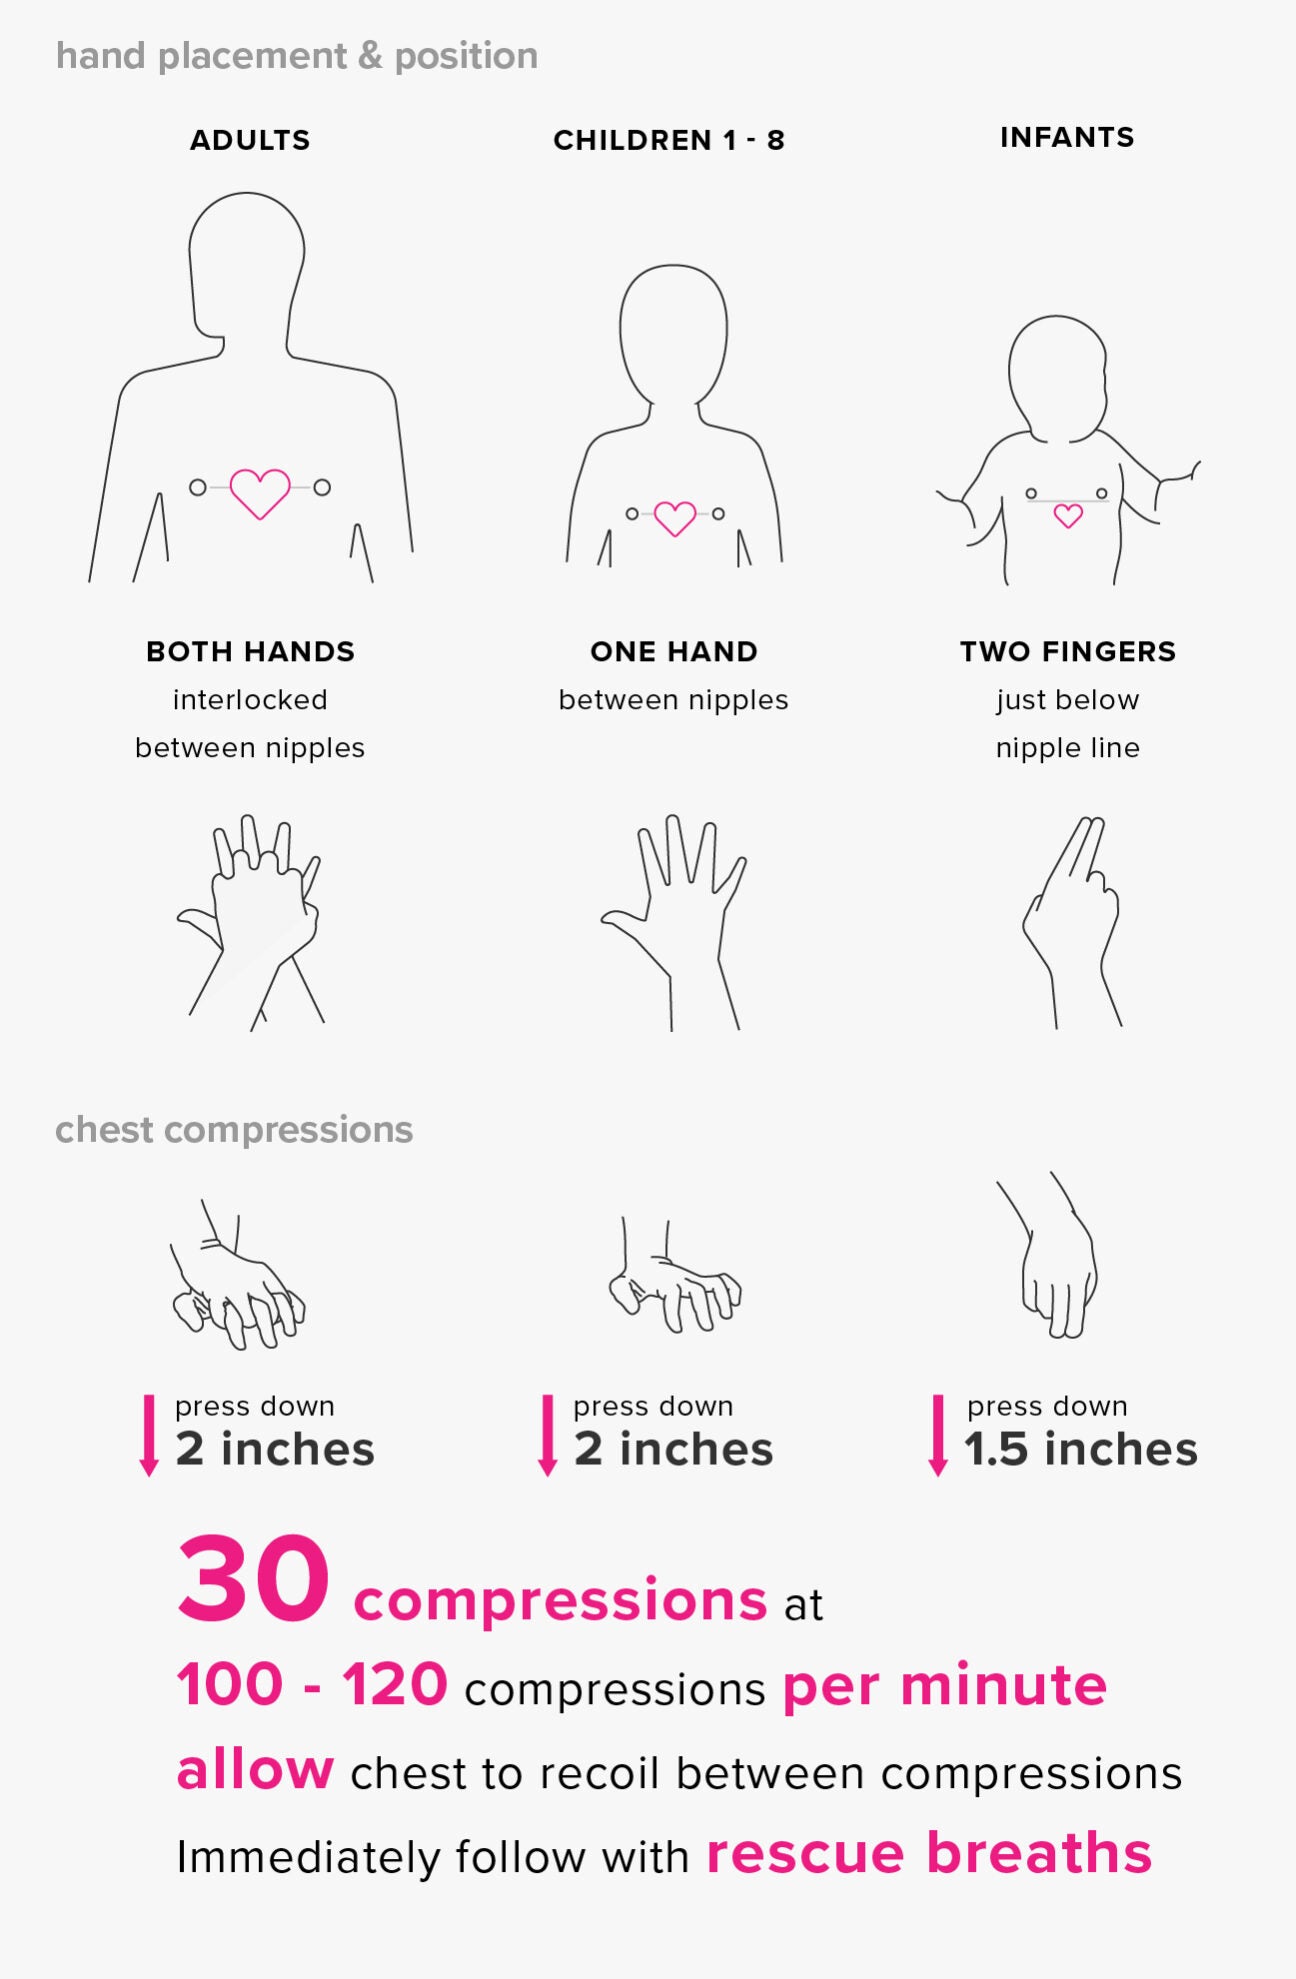 CPR Hand Placement: How to Position your Hands for Chest Compressions